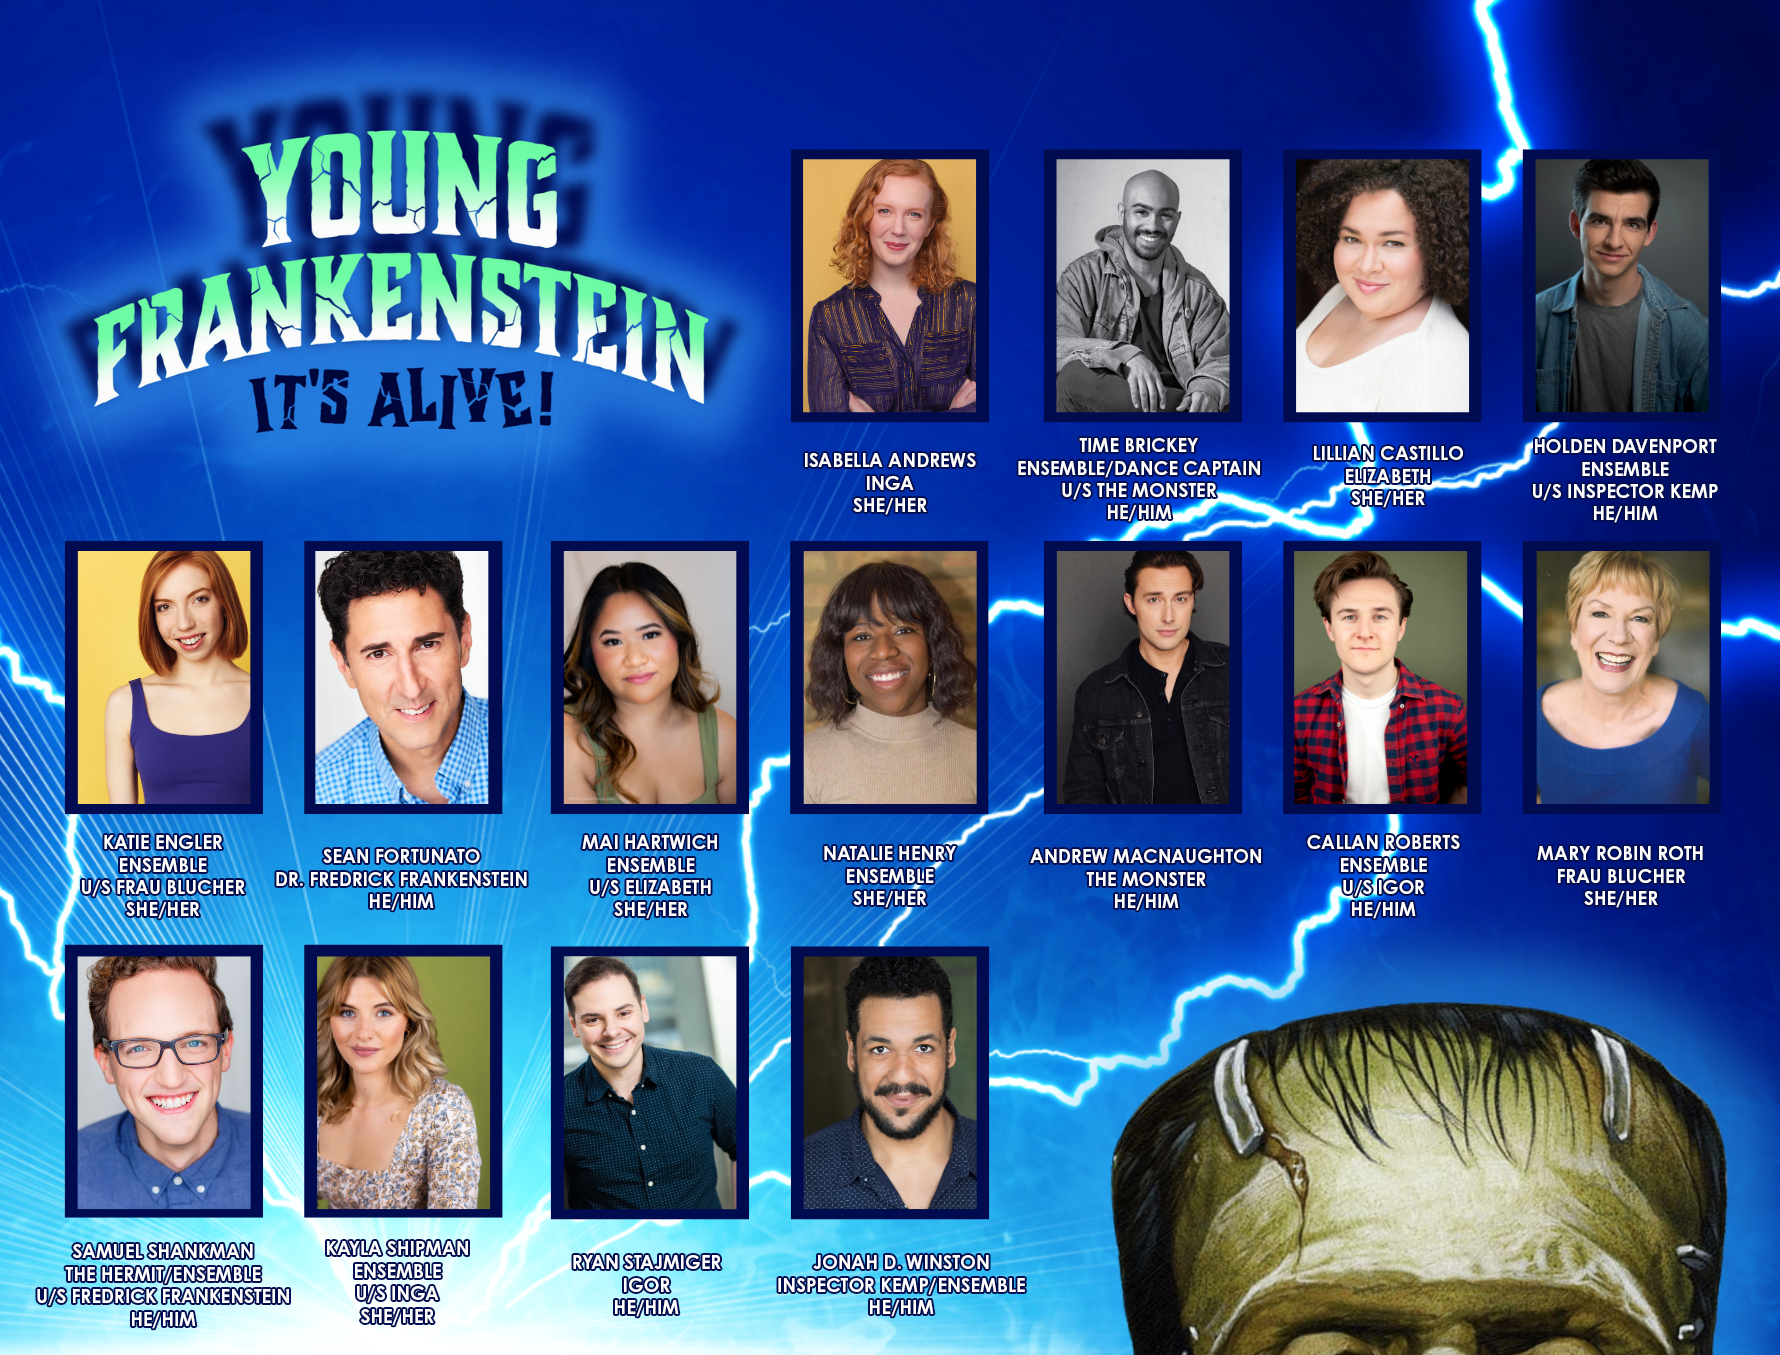 Review: “Young Frankenstein” at Mercury Theater